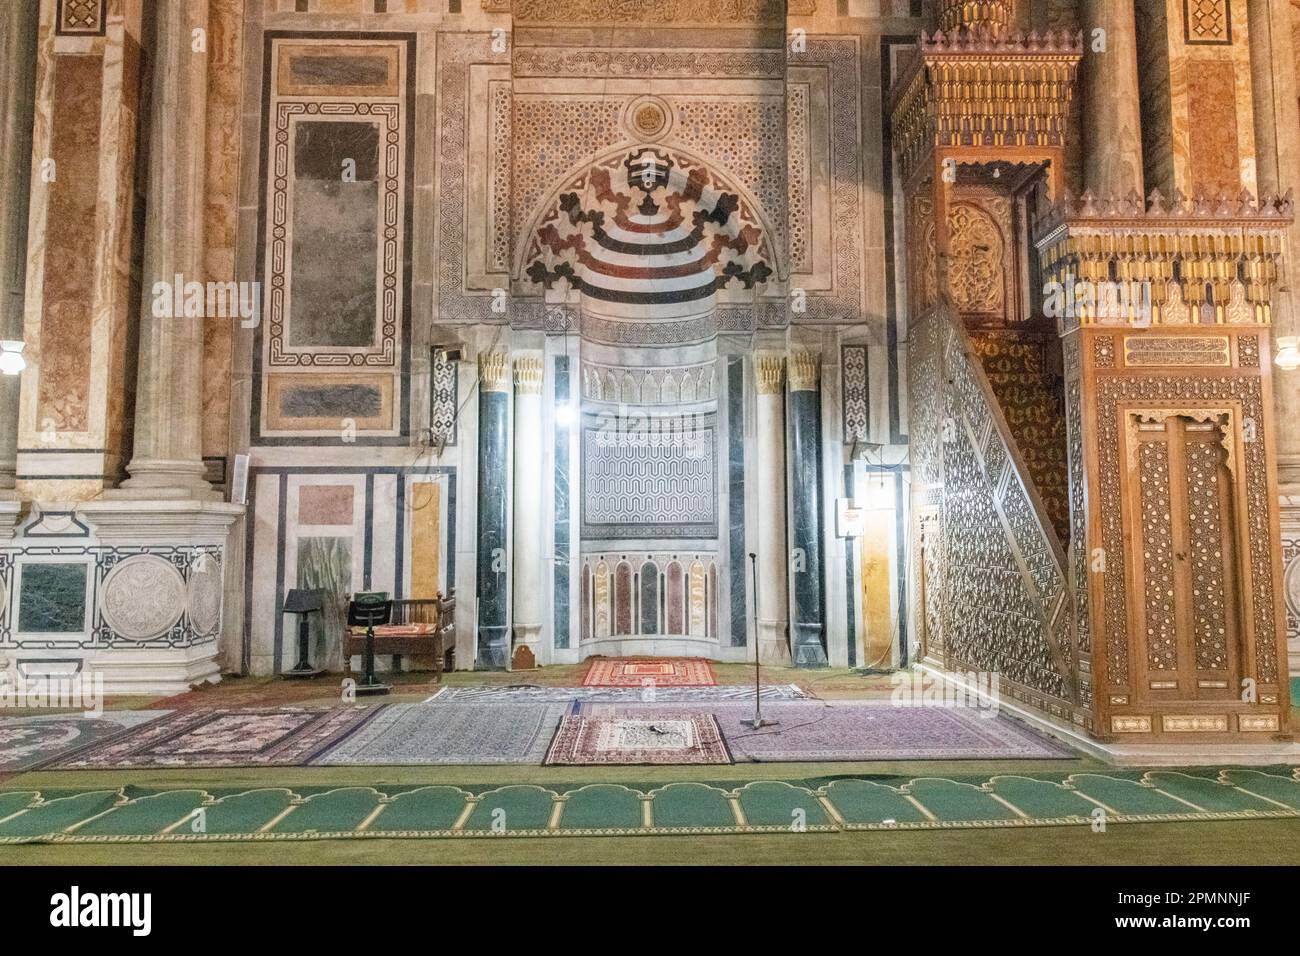 The Mihrab inside the prayer hall of Al-Rifai Mosque in Cairo, Egypt Stock Photo